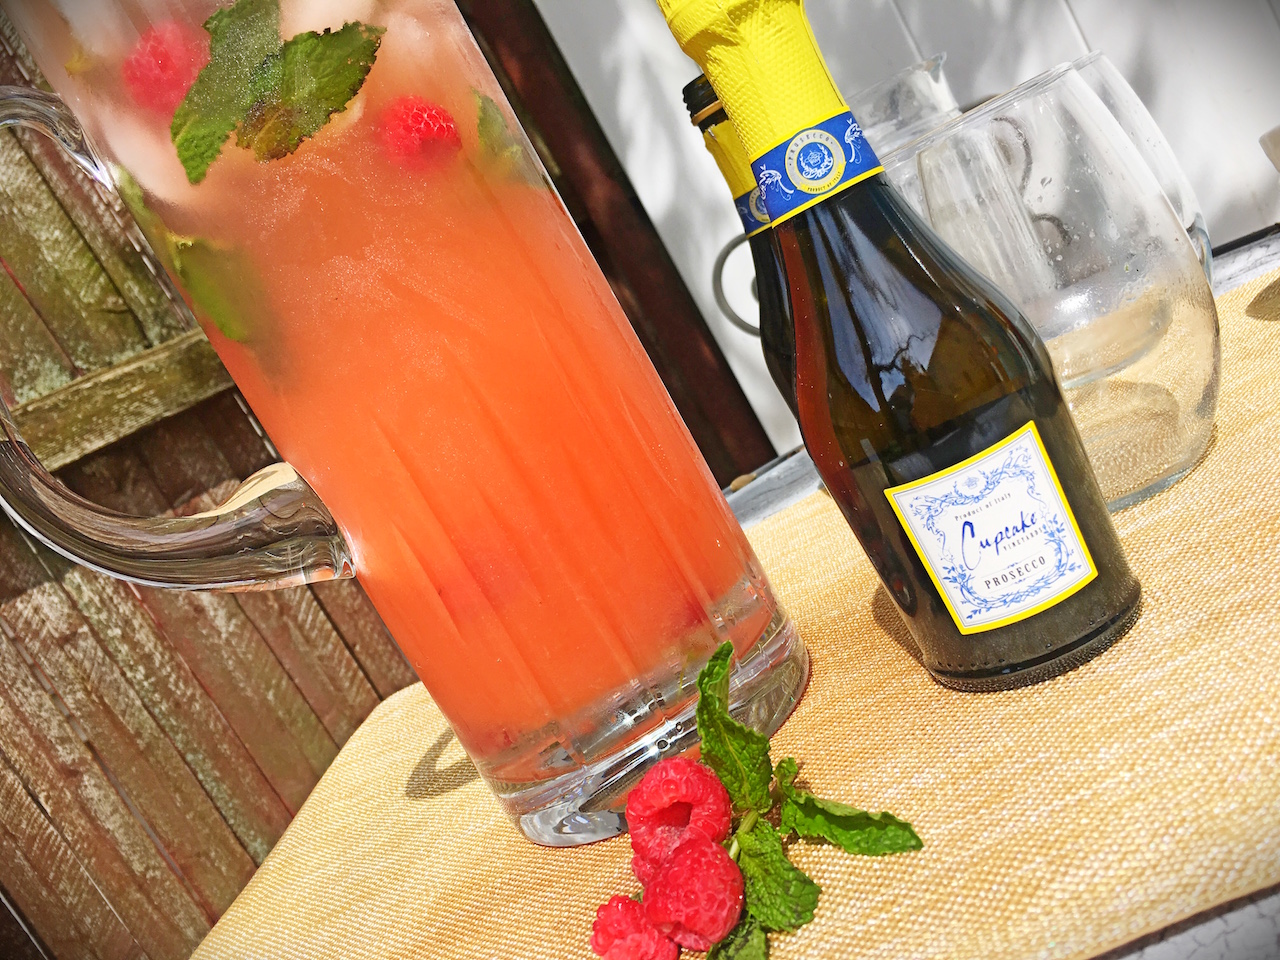 Prosecco Punch